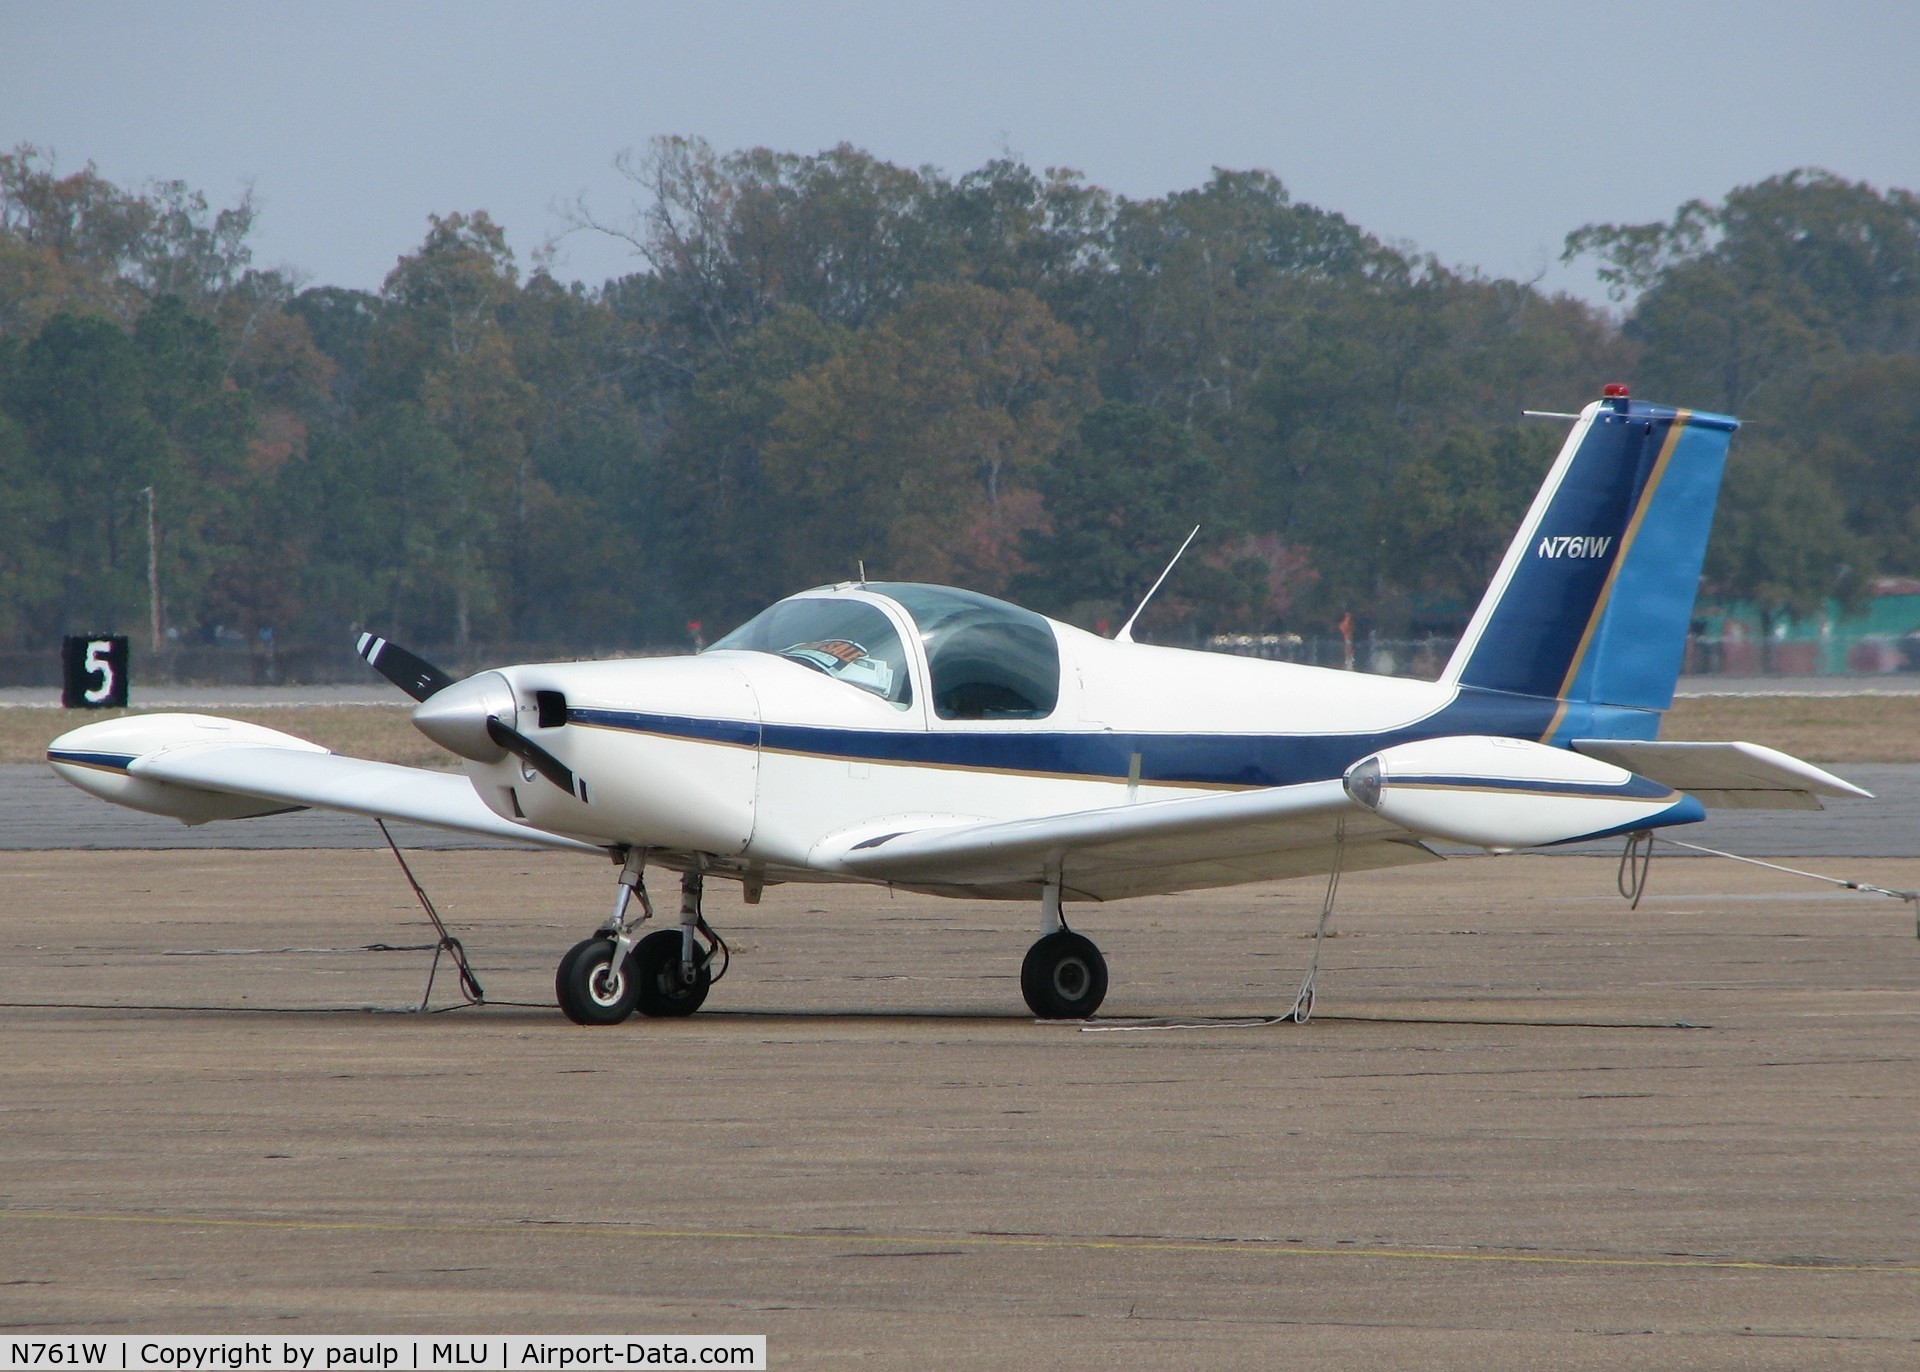 N761W, 1976 Pazmany PL-2 C/N 60, Parked at the Monroe Louisiana airport.